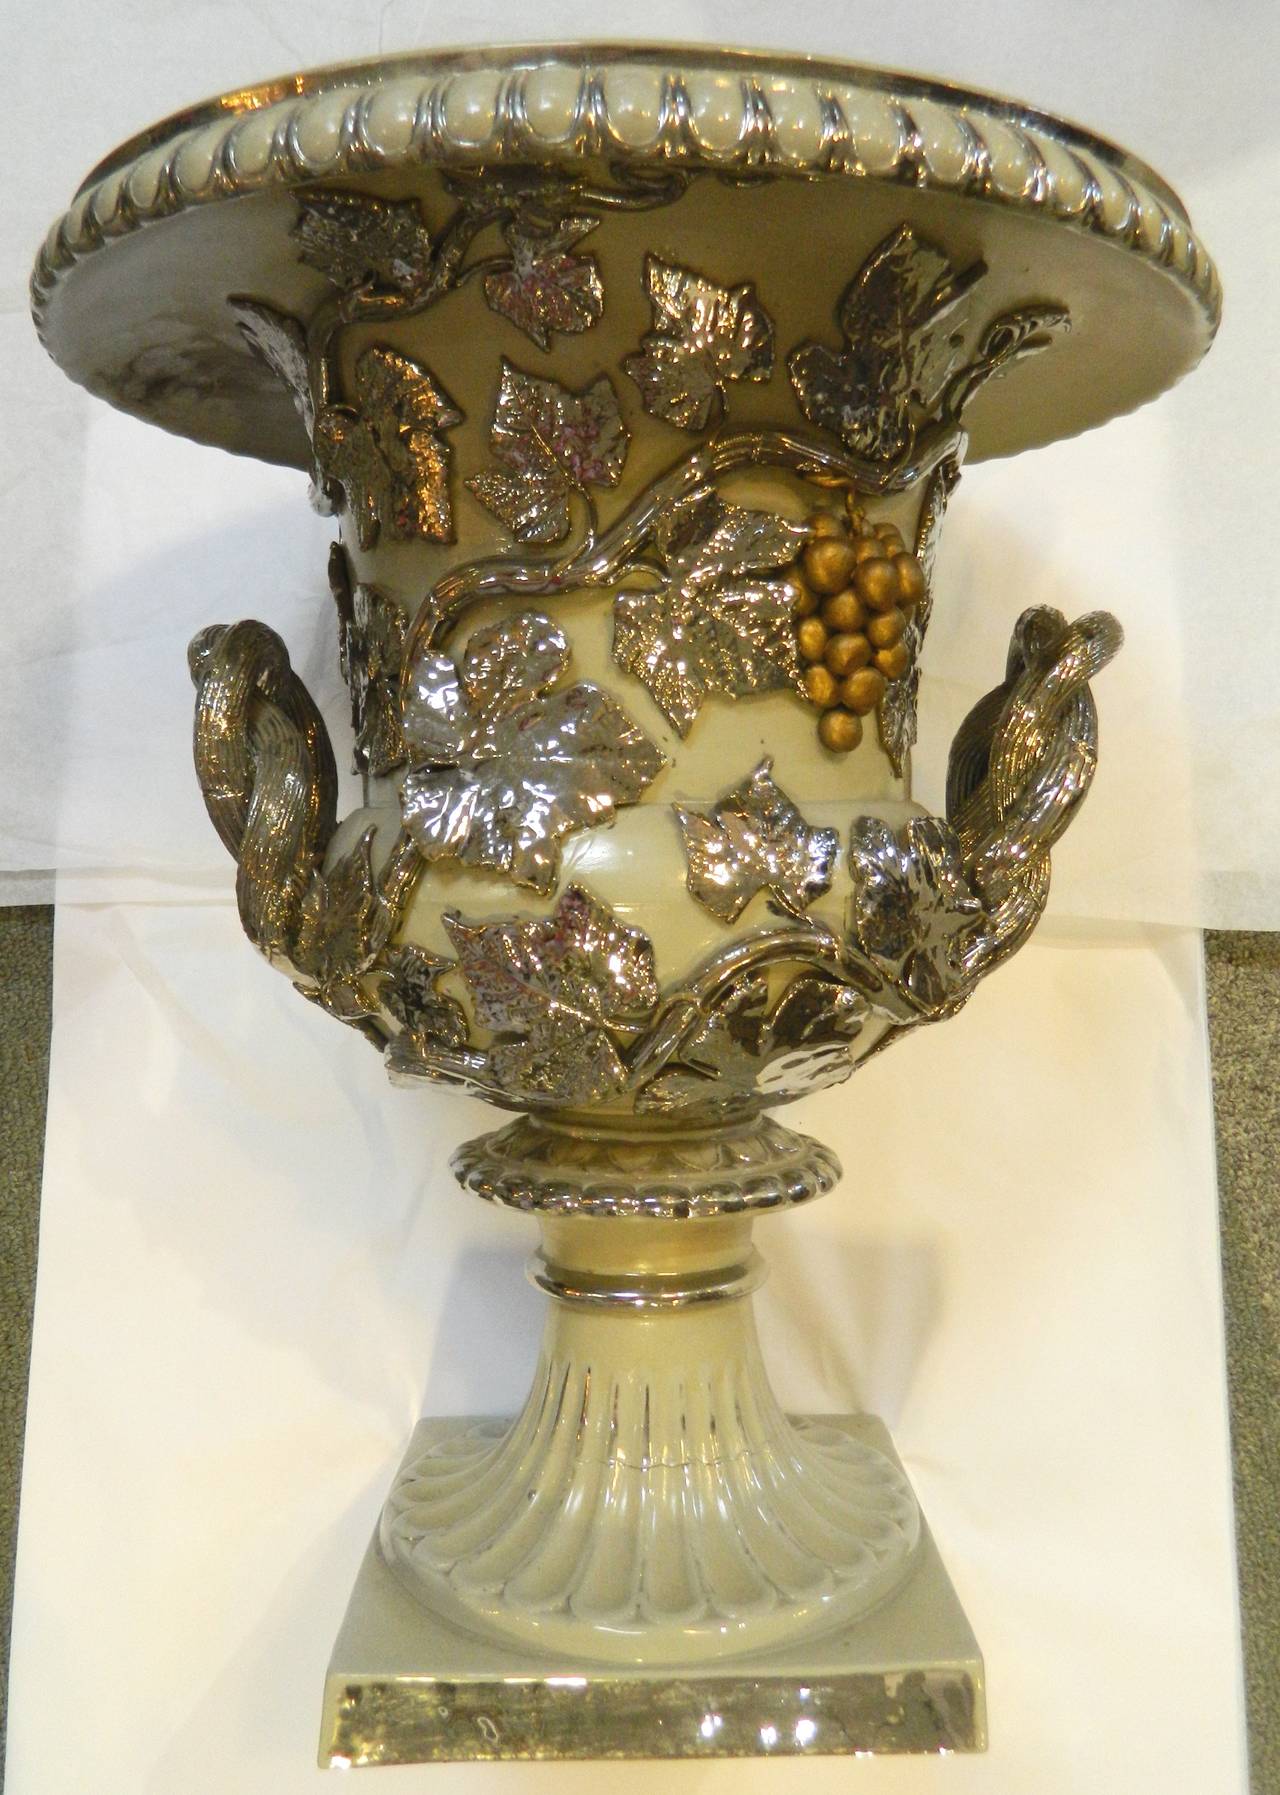 Greek Revival large stoneware urn with taupe ground and applied raised grapes and leaves with silver decoration, circa 1850s. The handles are twisted vines.
This is one of two urns being offered individually that are similar sizes and are great